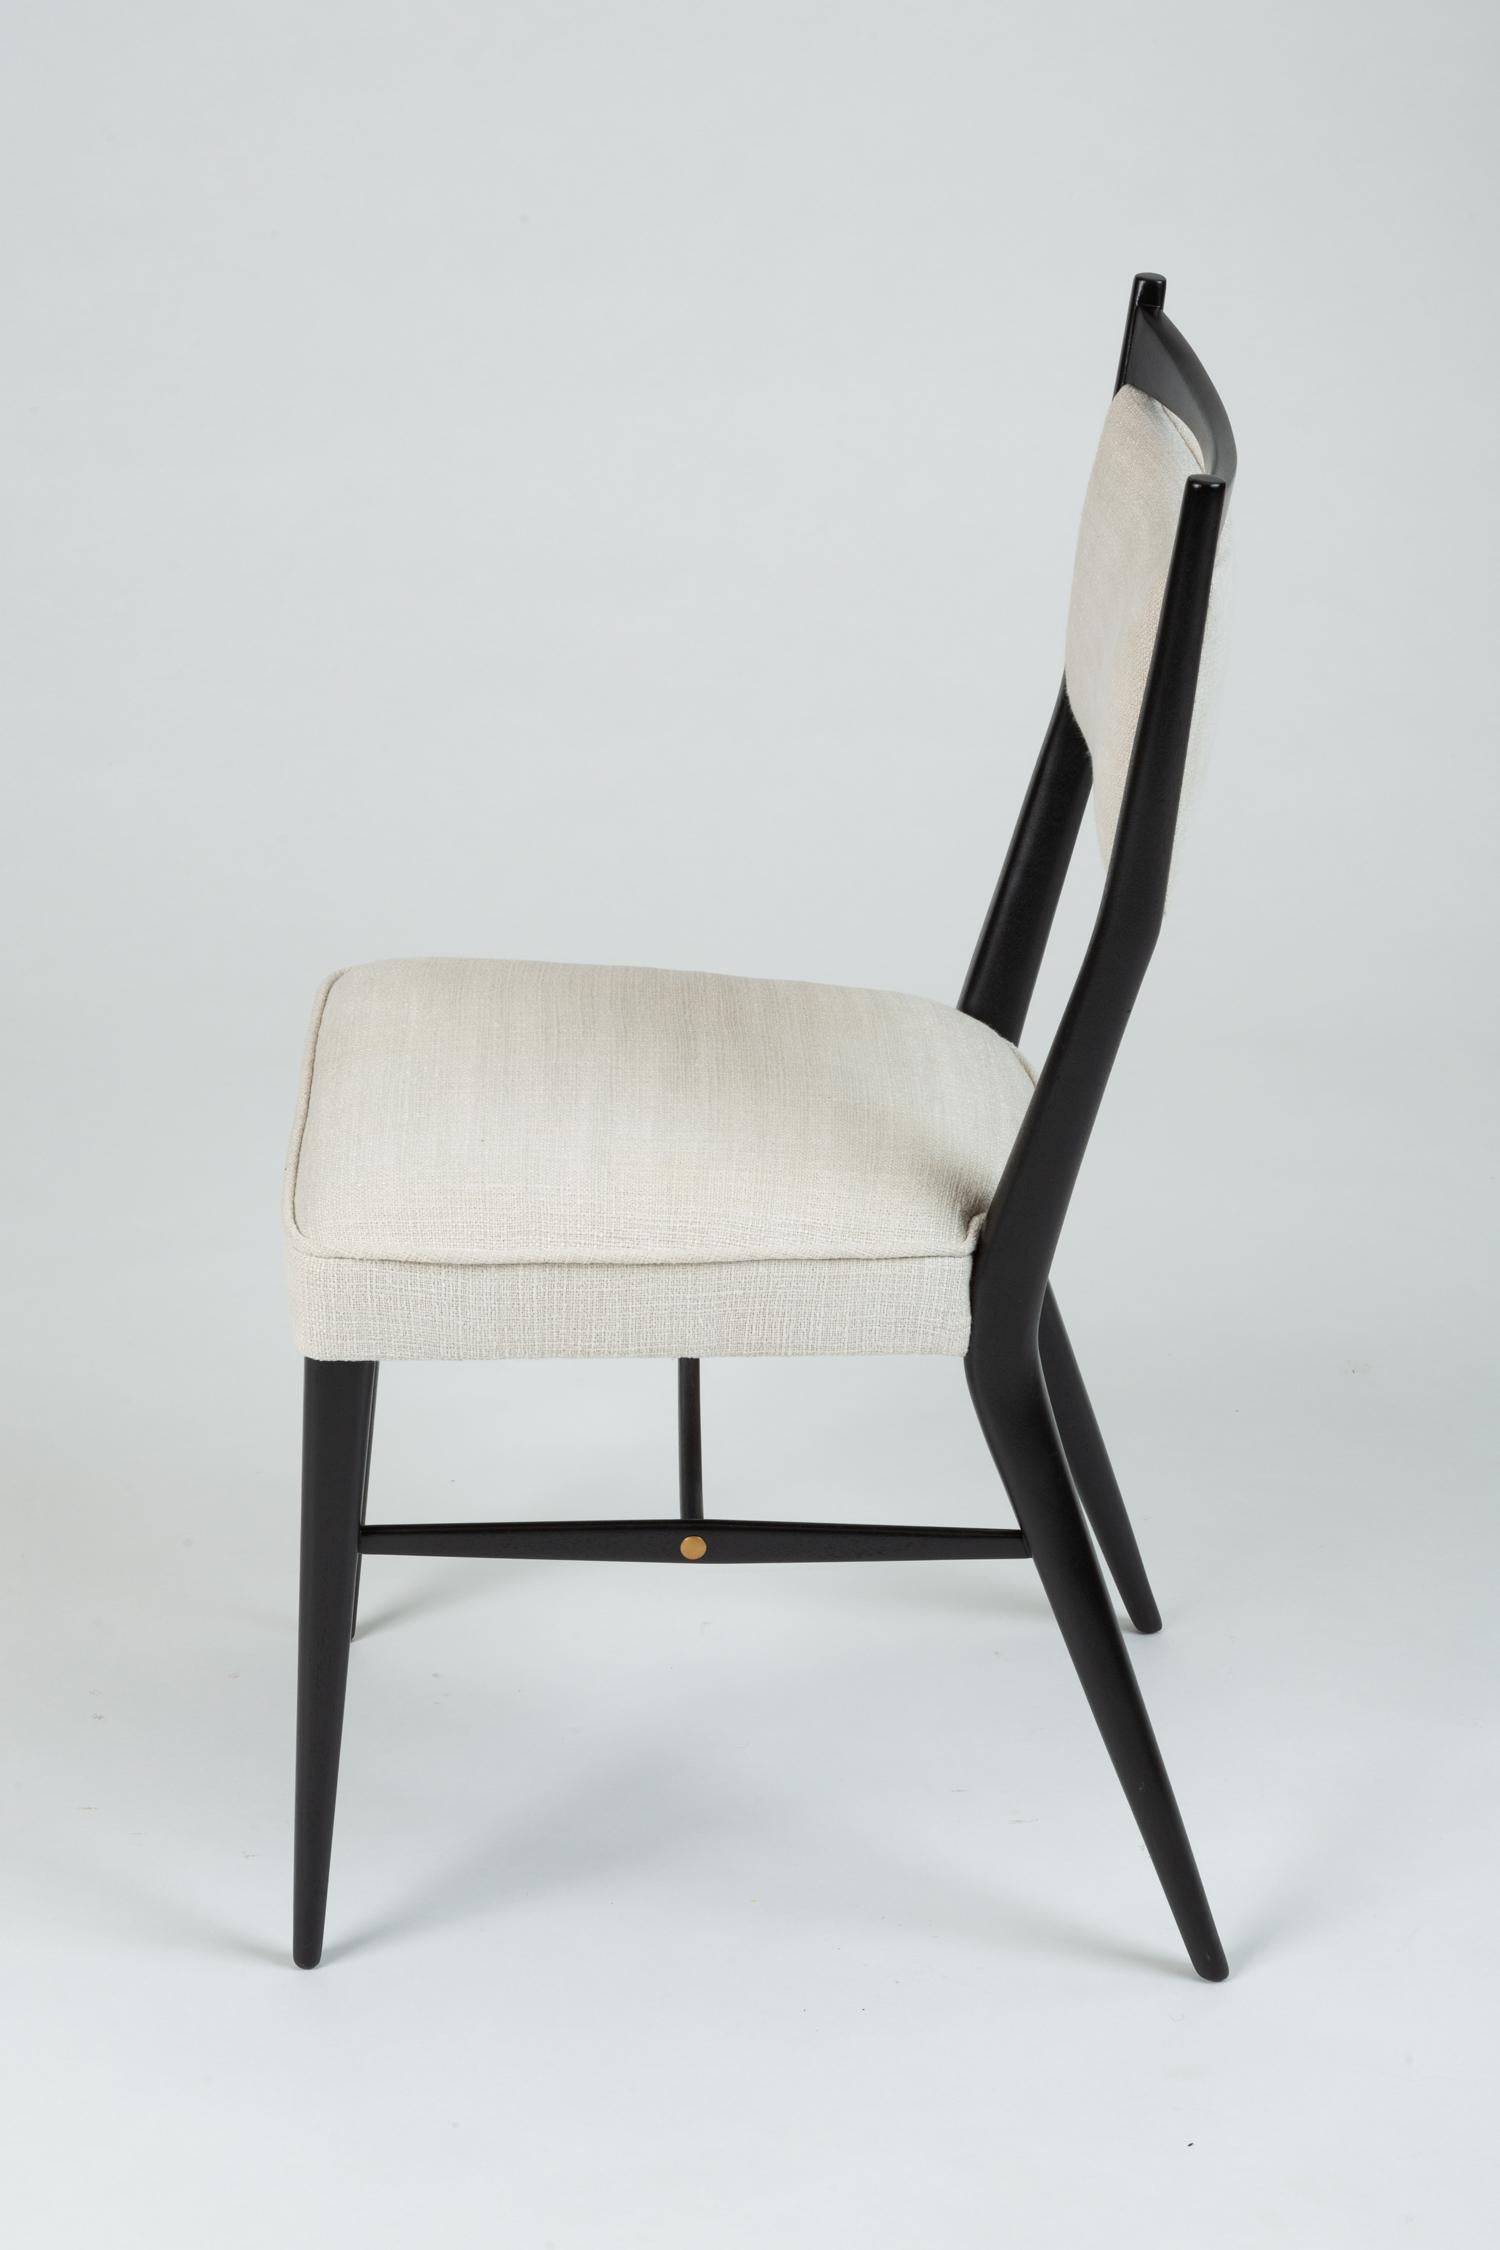 Ebonized Connoisseur Group Side Chair by Paul McCobb for H. Sacks and Sons